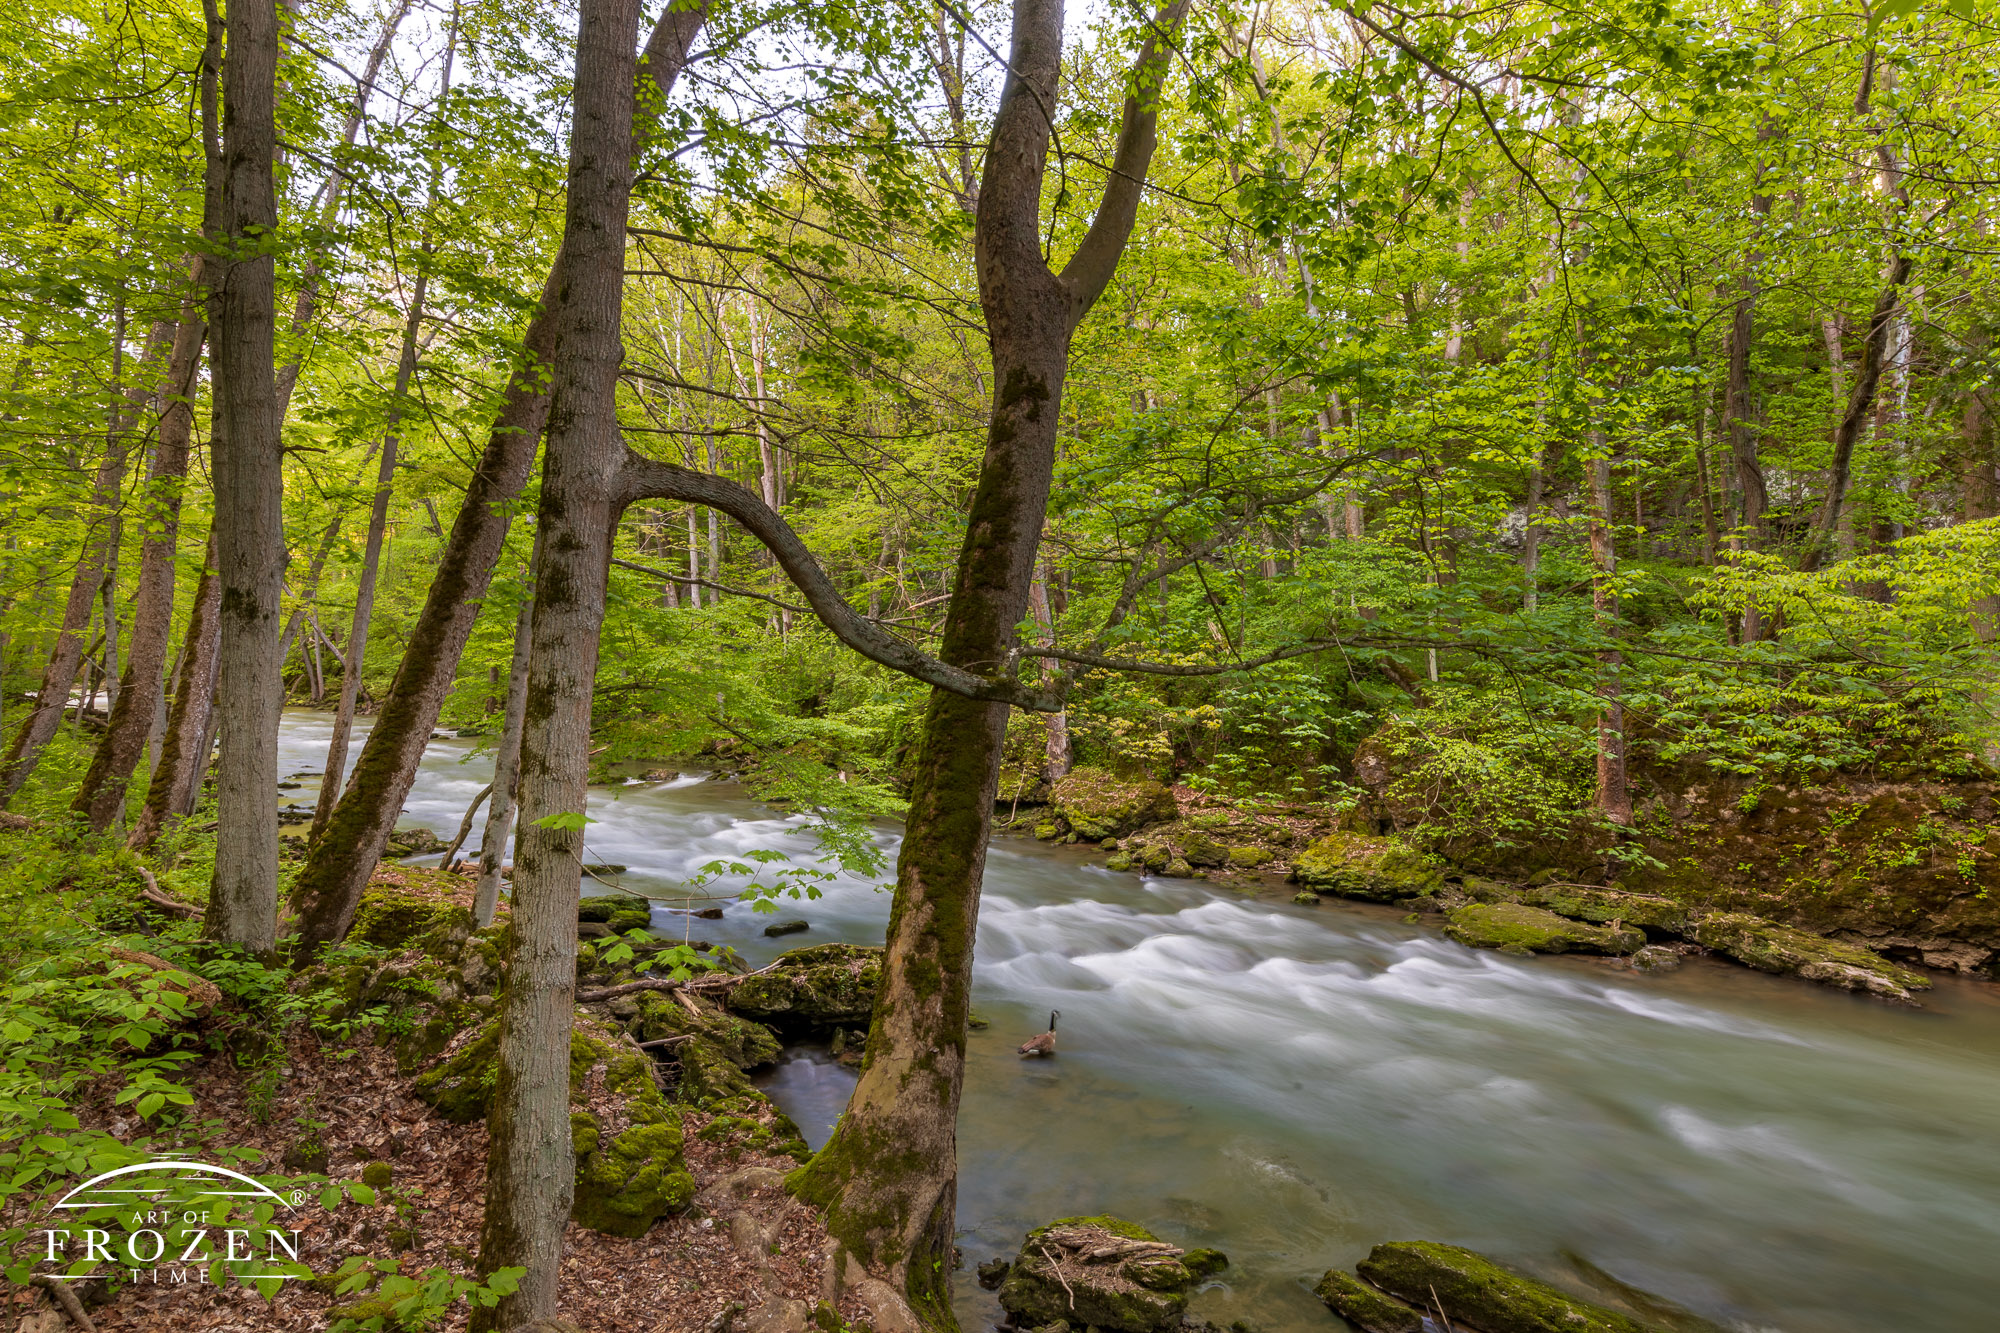 The Little Miami River passing through Clifton Gorge on a spring day